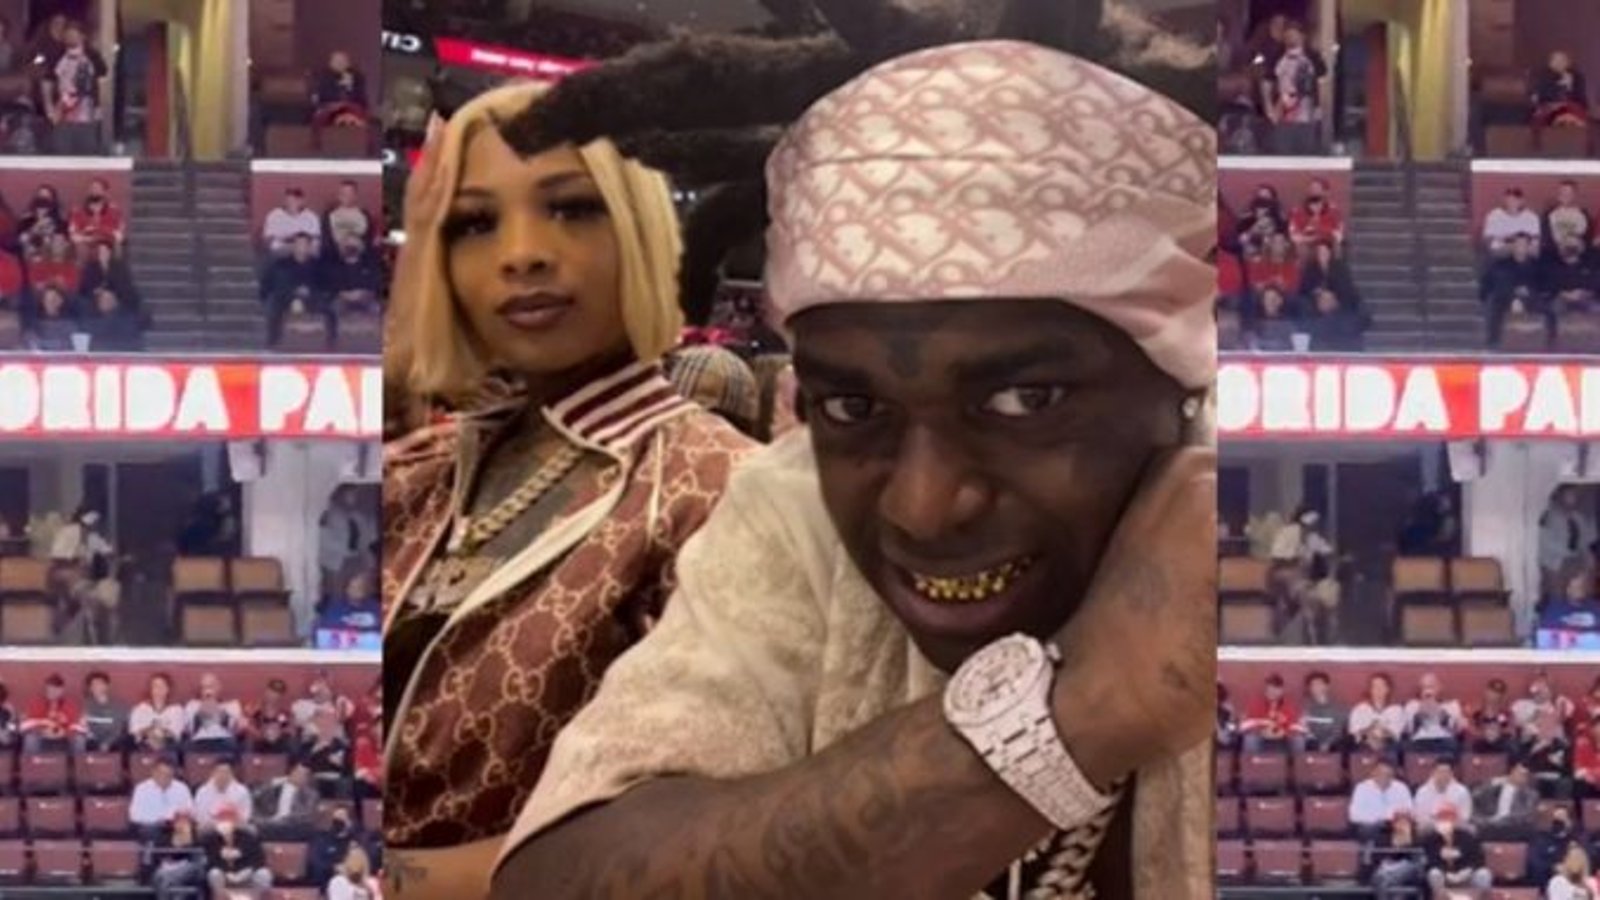 Rapper Kodak Black explains what really happened at Panthers’ game